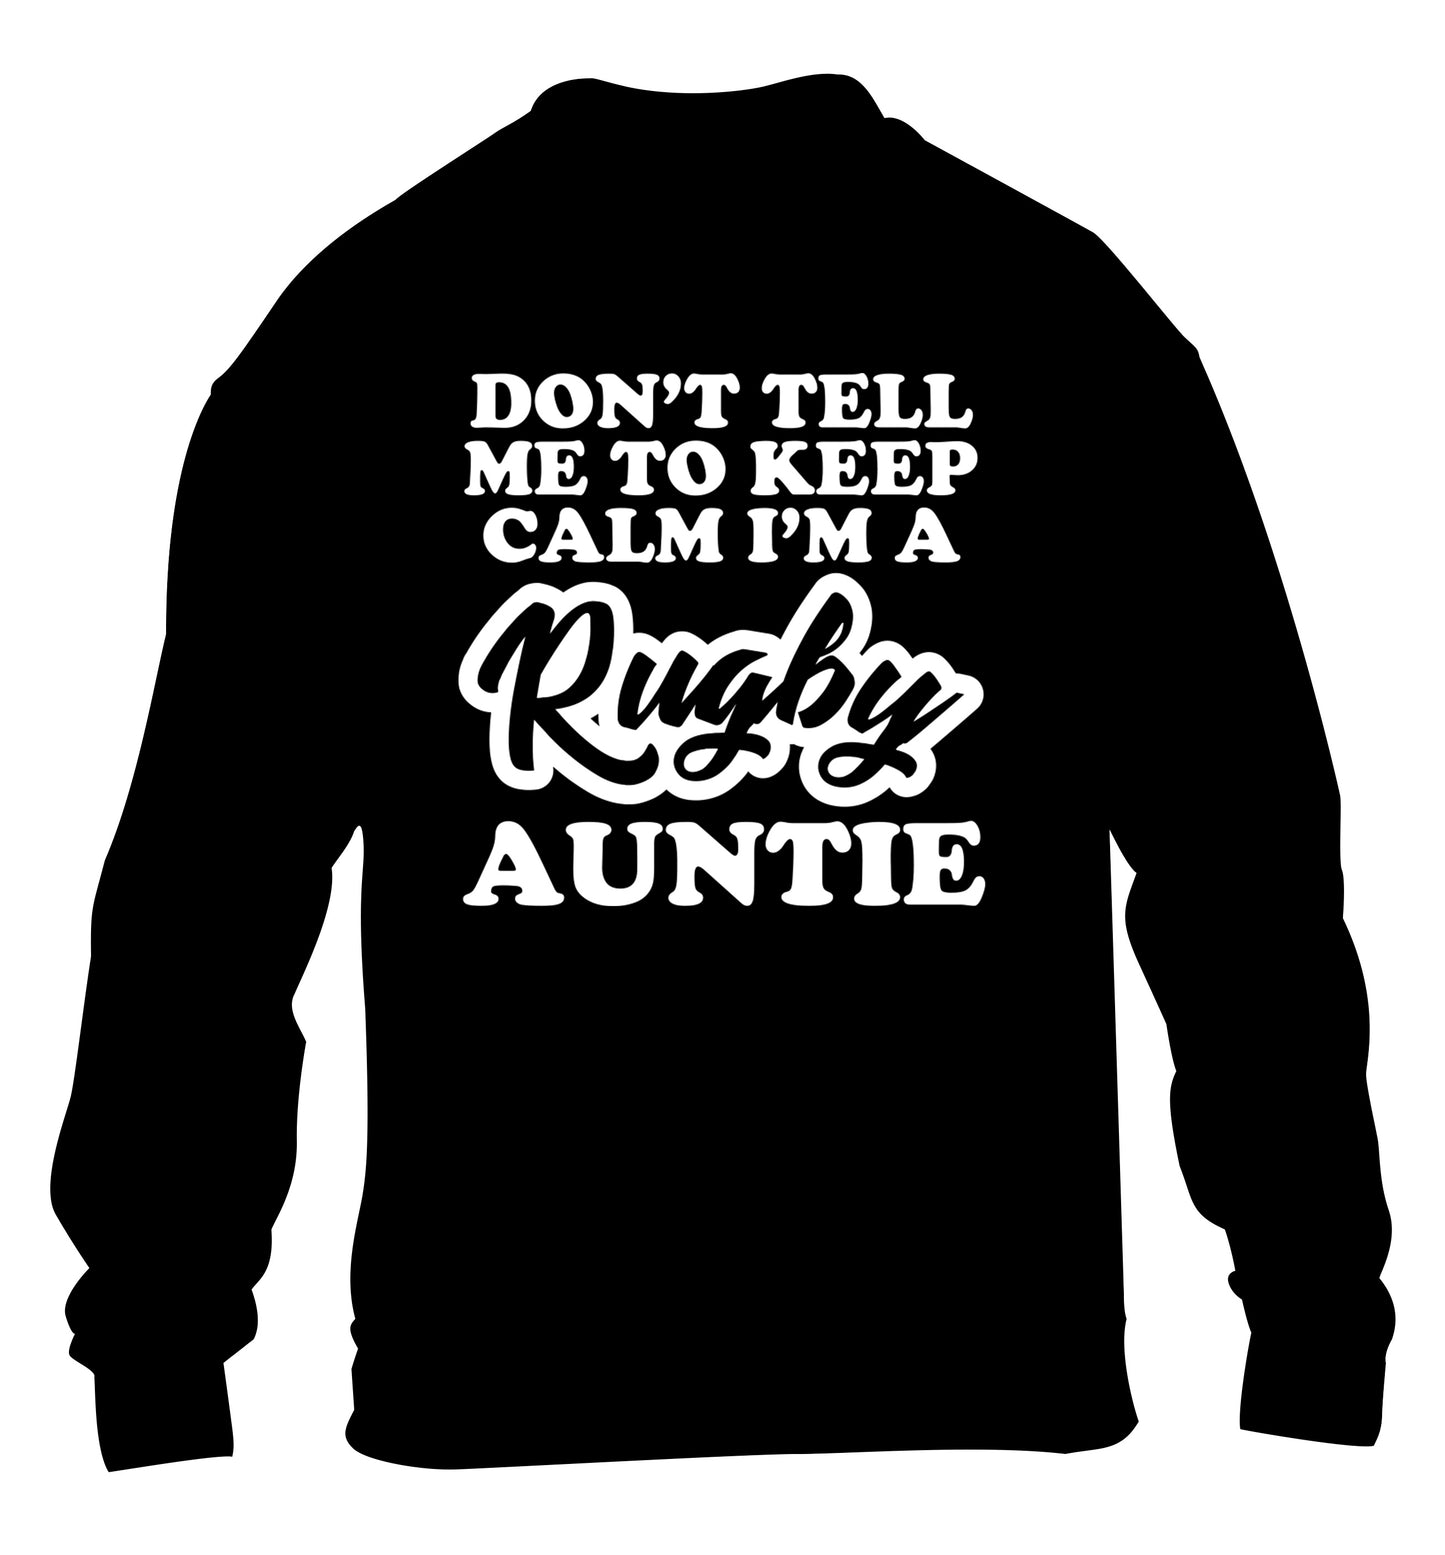 Don't tell me keep calm I'm a rugby auntie children's black sweater 12-13 Years